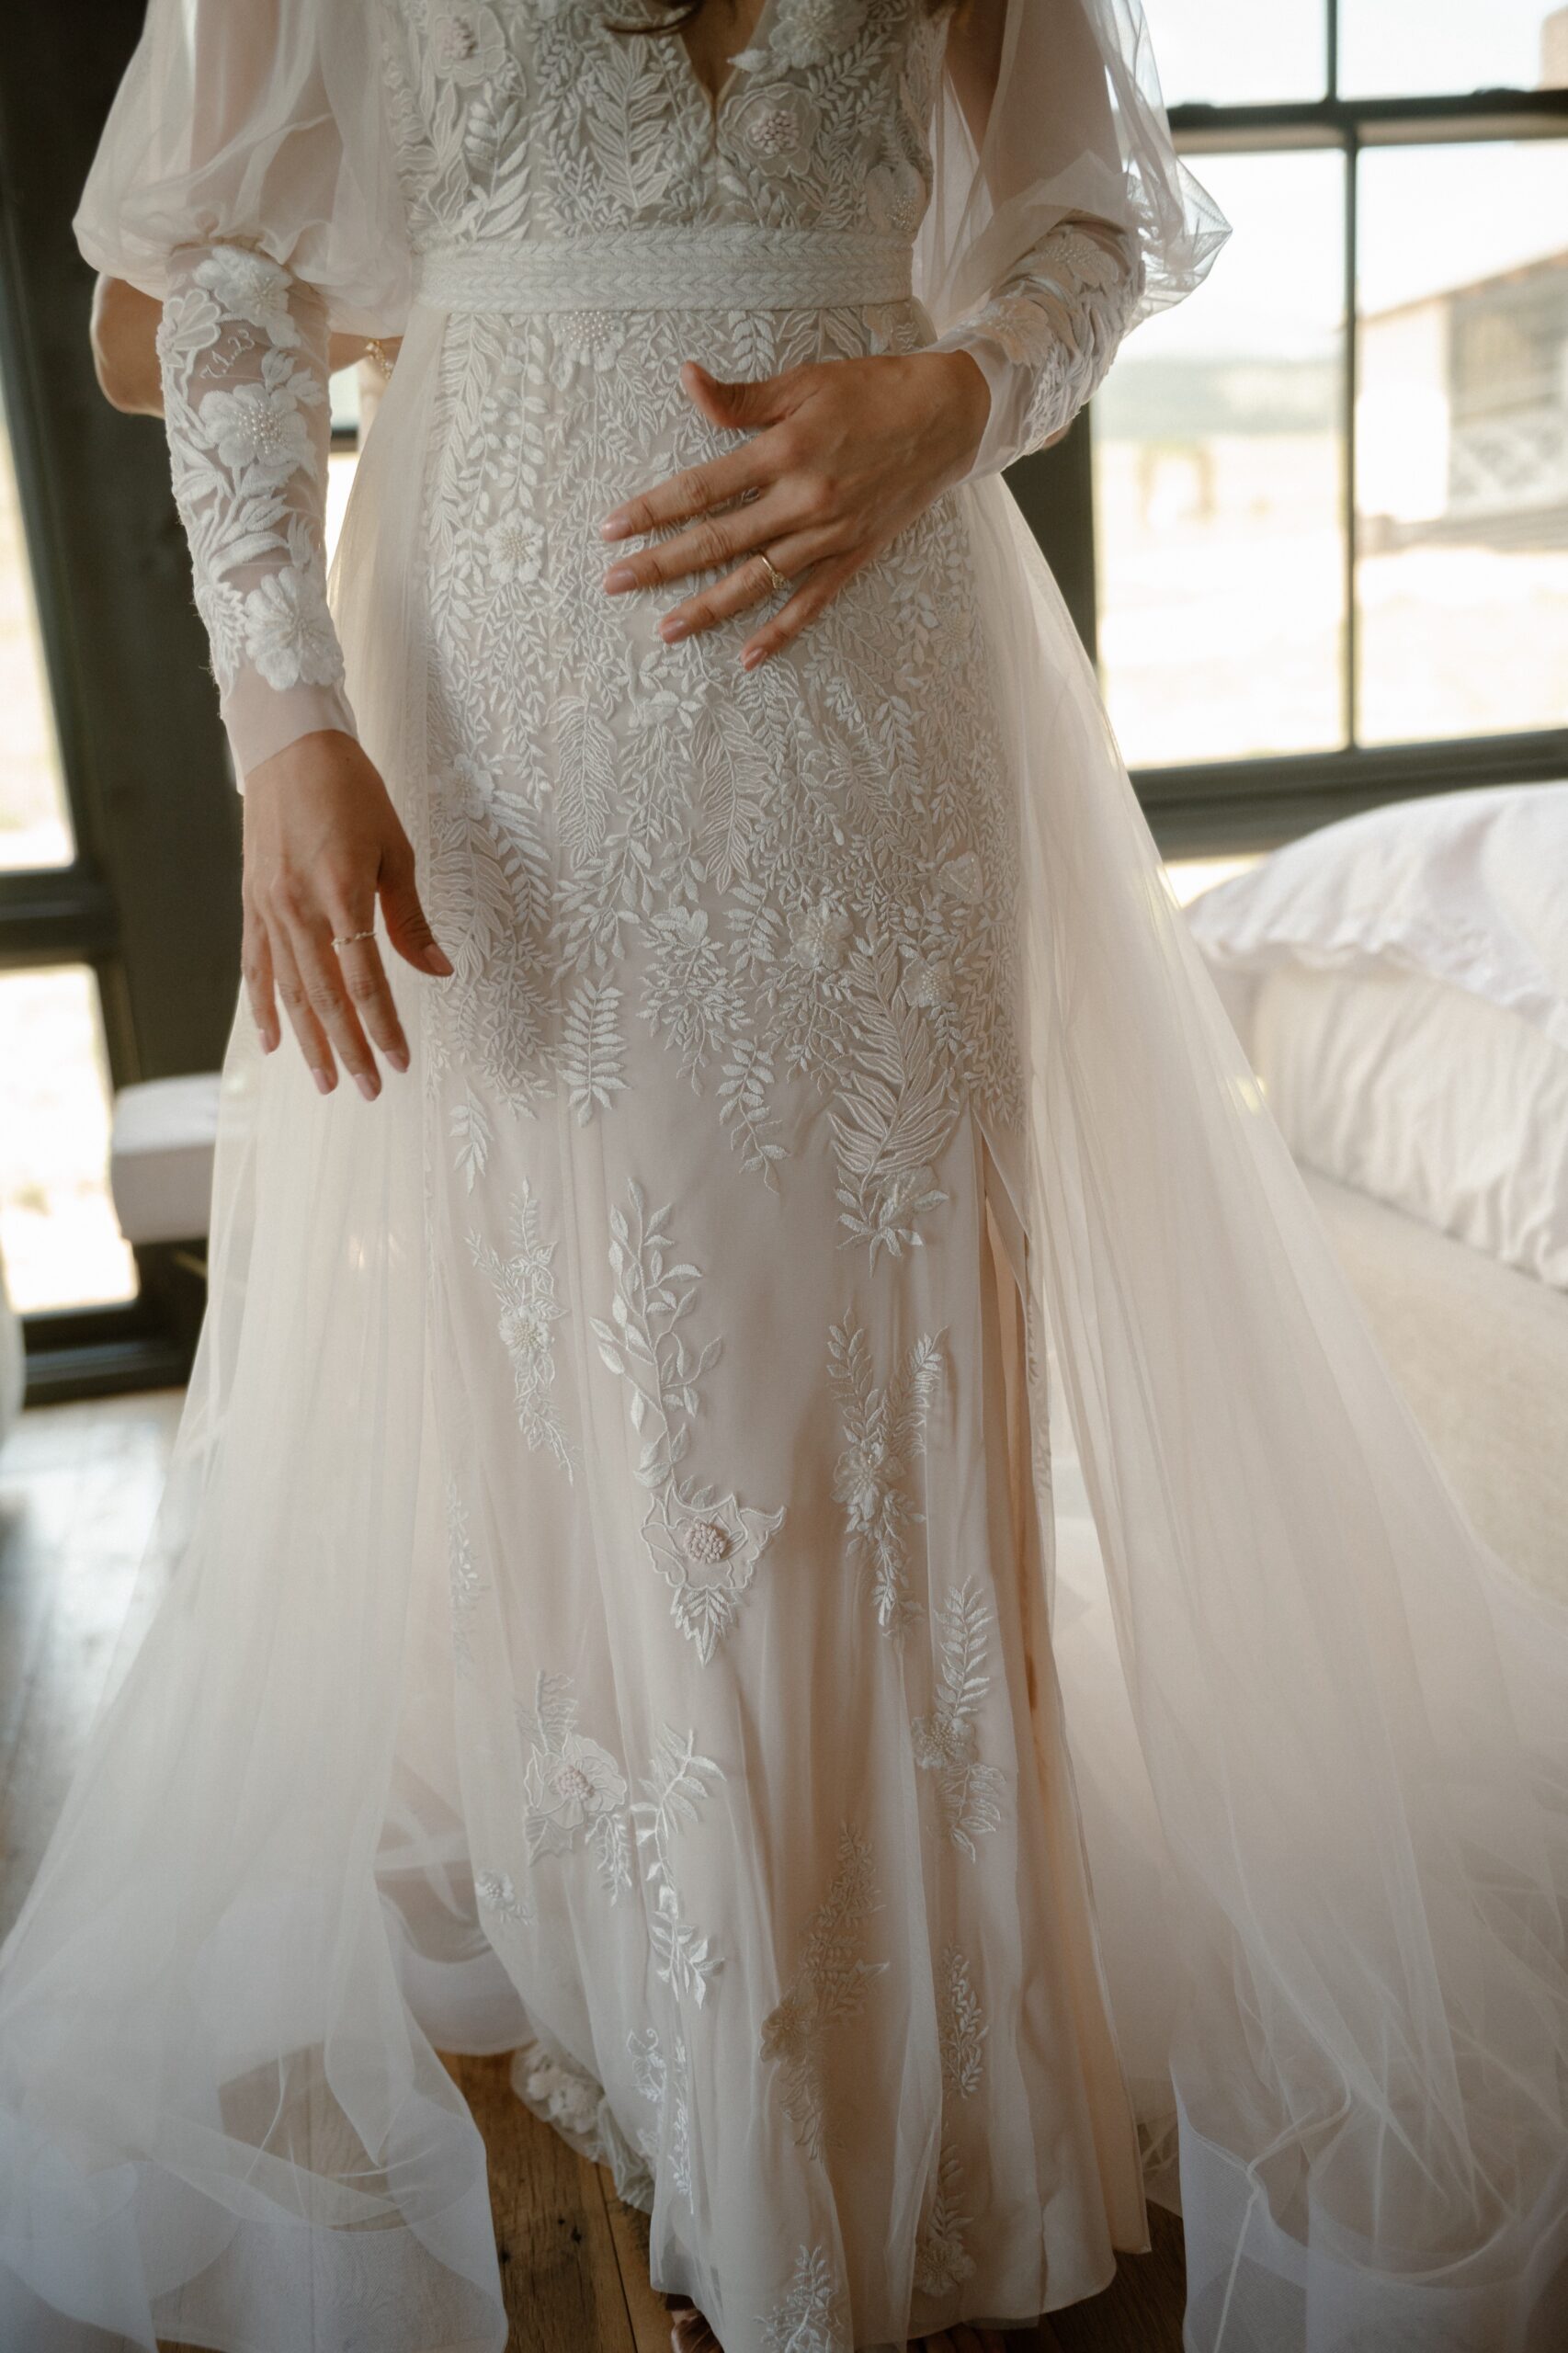 A photo of a bride's torso as she gets in her wedding dress. Photo by Ashley Joyce.